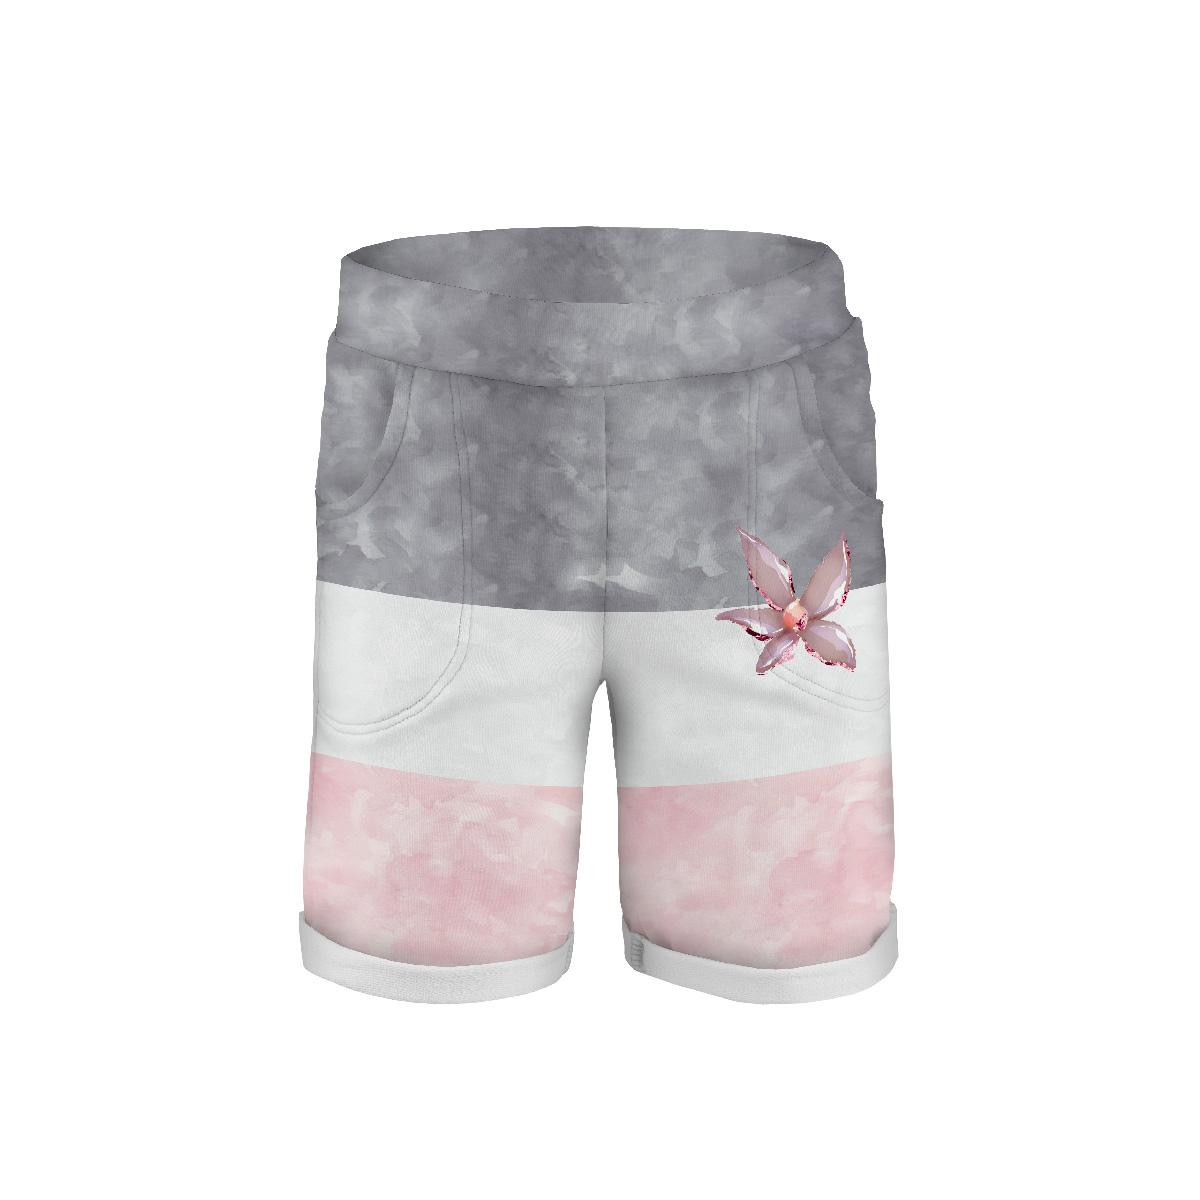 KID`S SHORTS (RIO) - GLITTER FLOWERS (DRAGONFLIES AND DANDELIONS) / STRIPES - looped knit fabric 